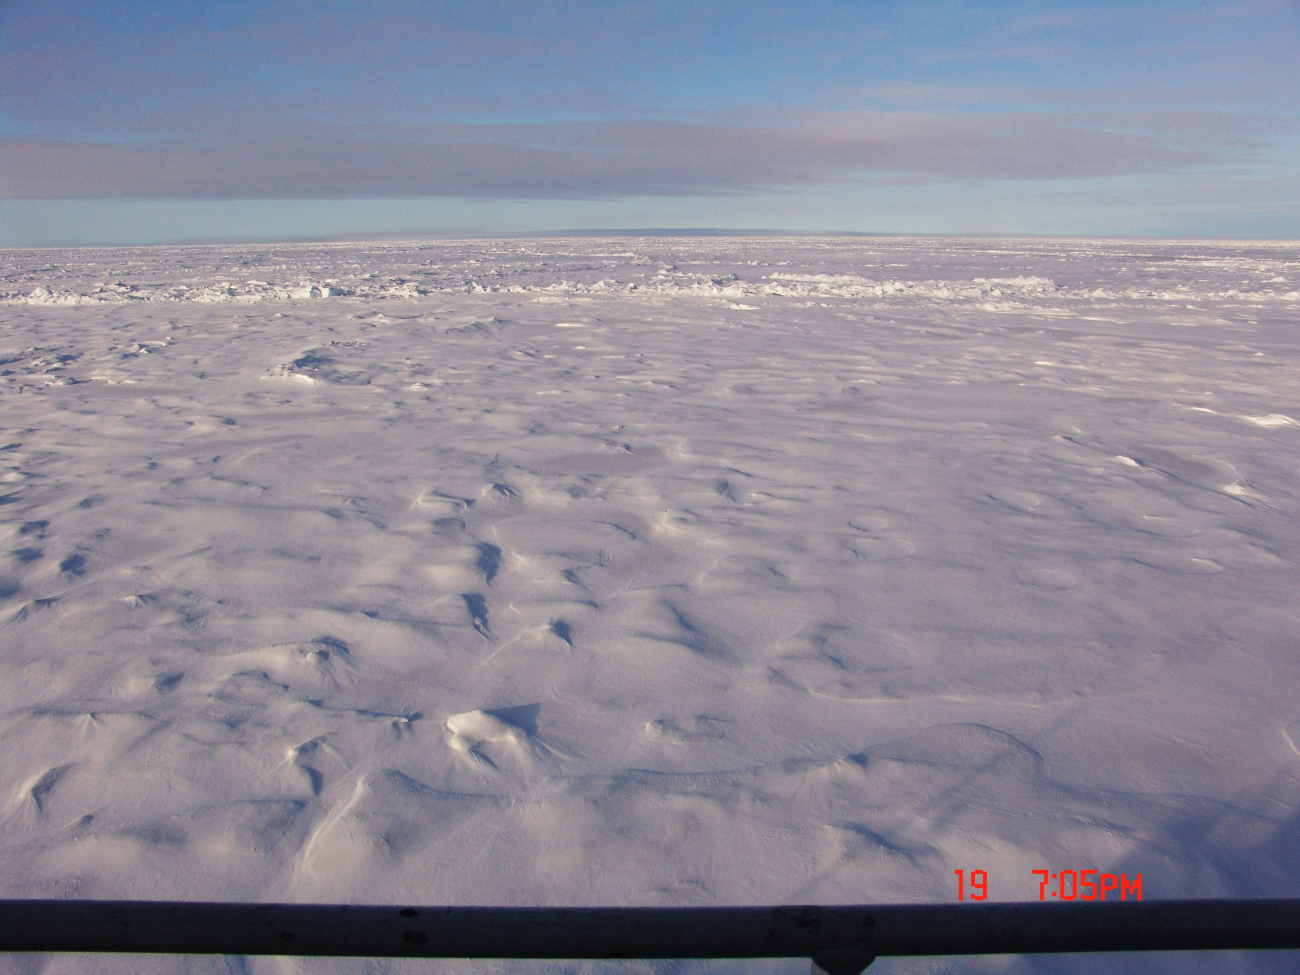 An ice field stretching to the horizon